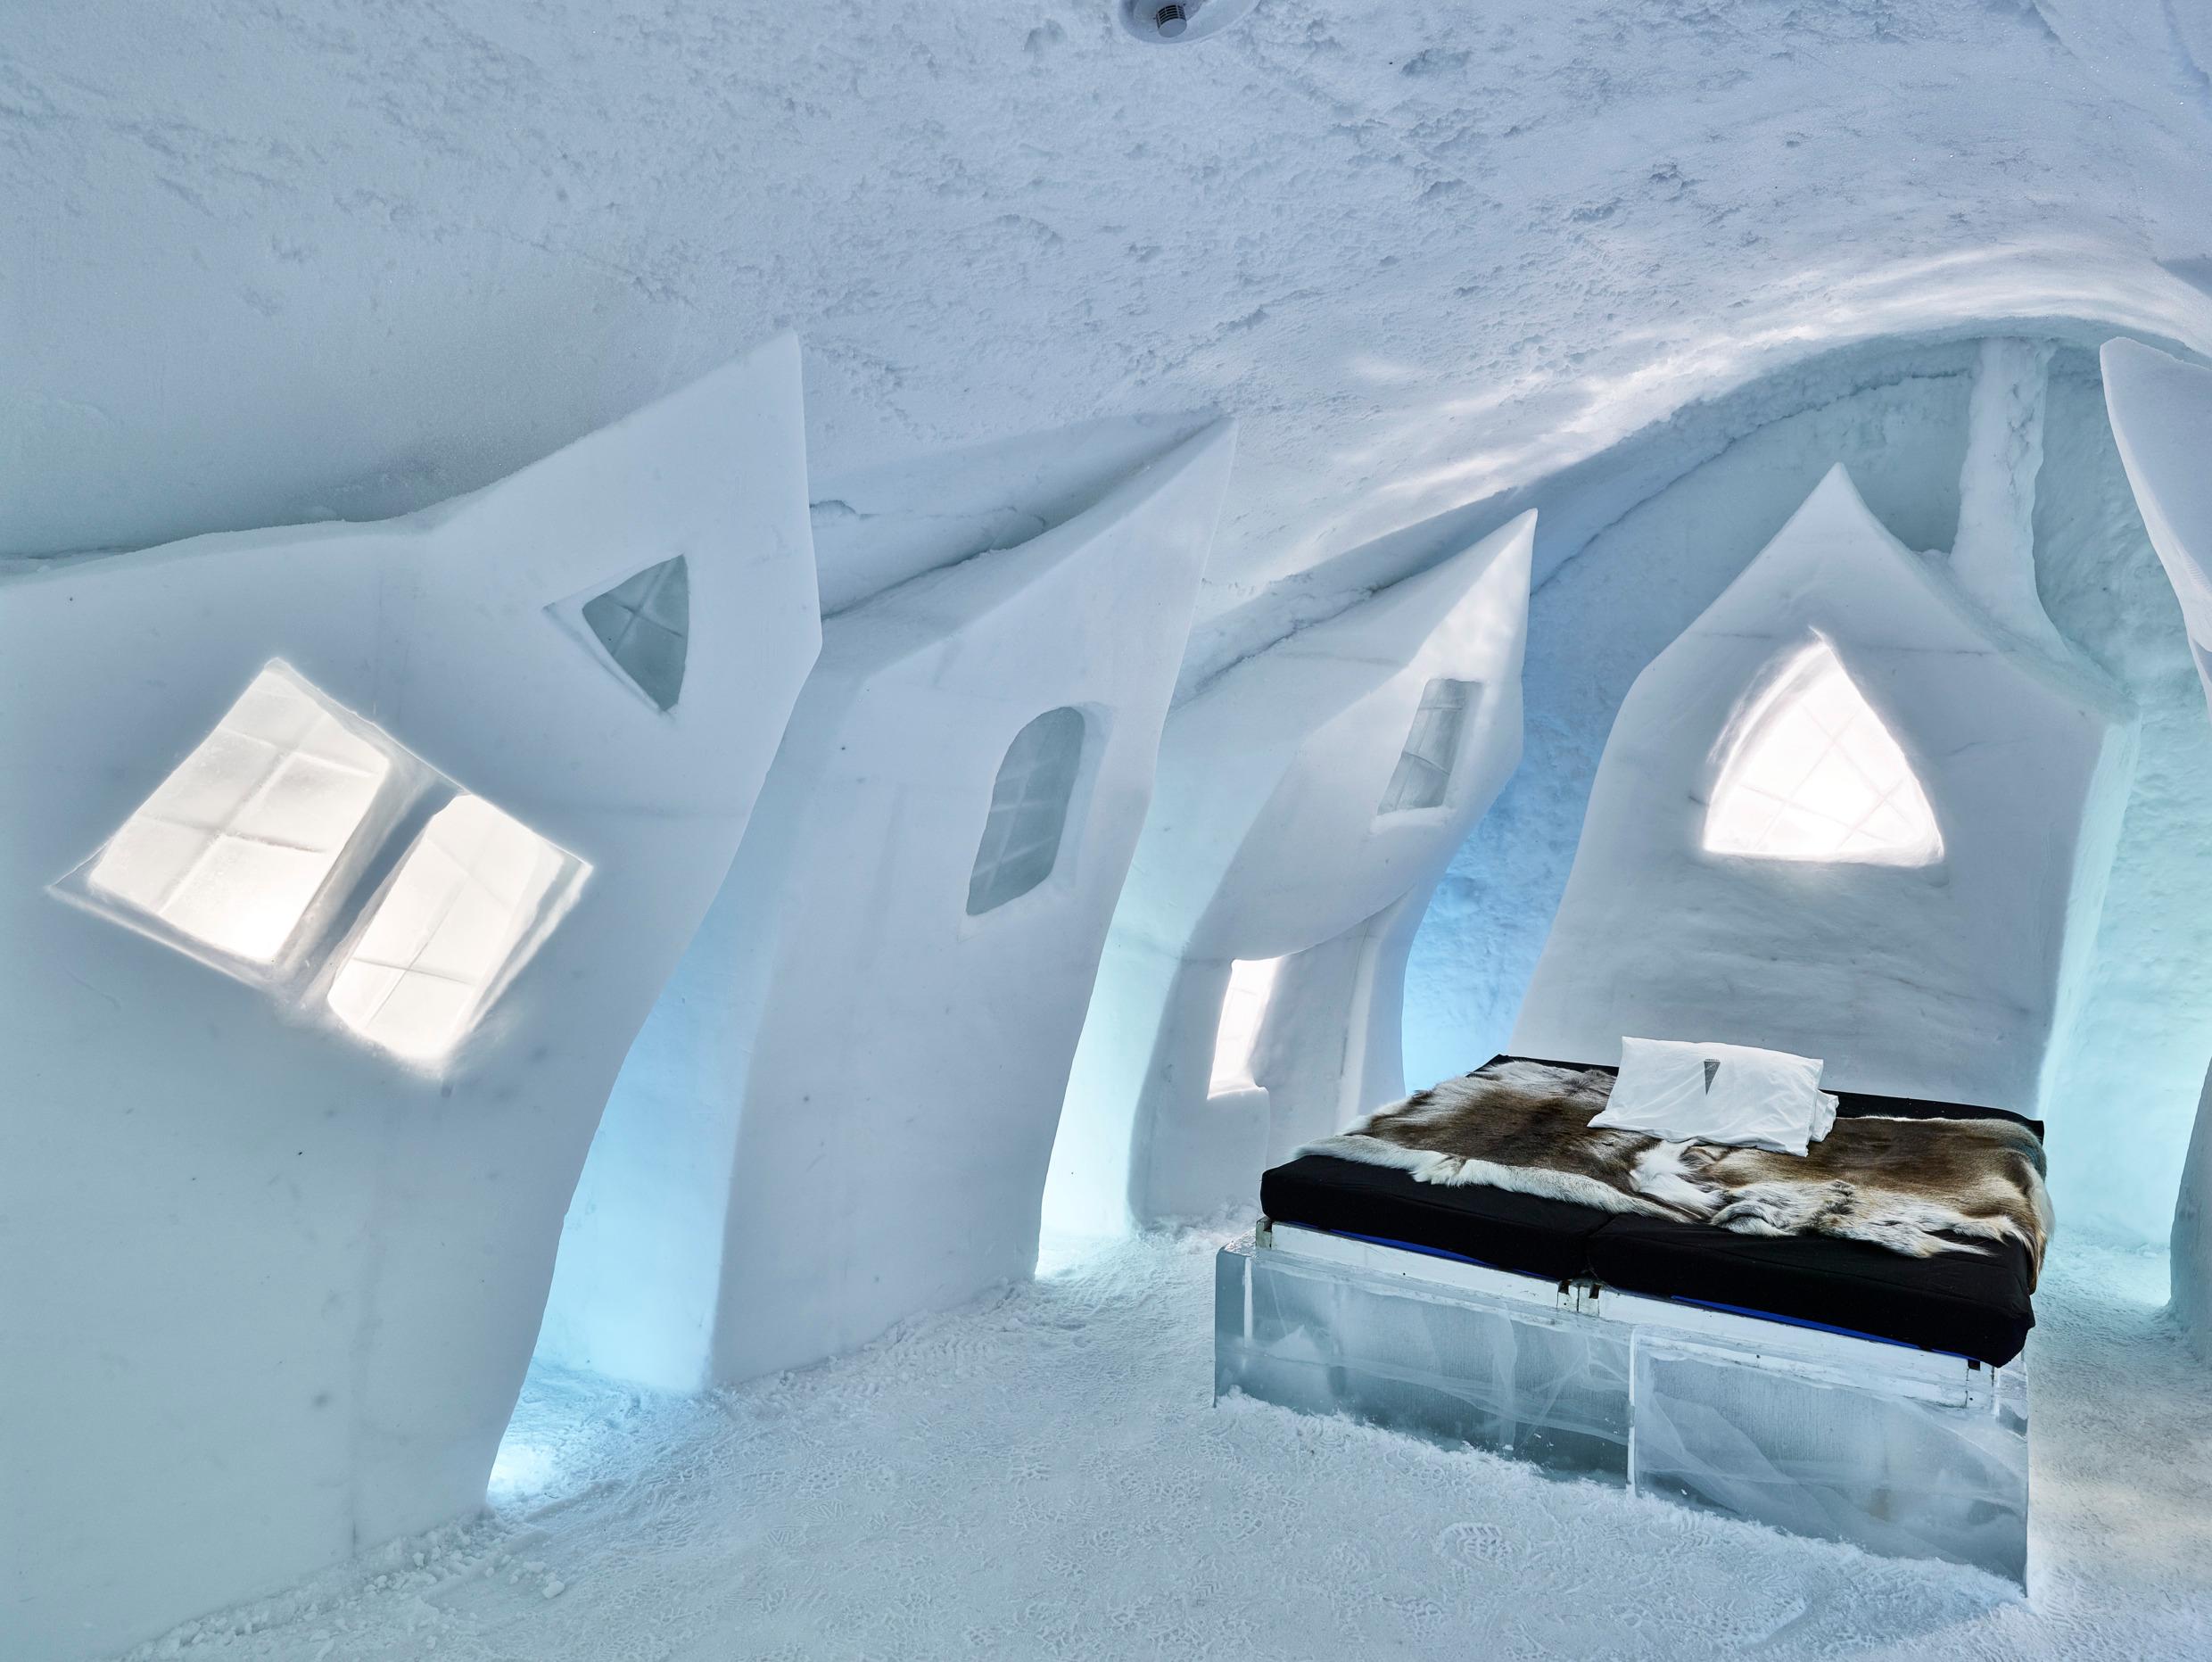 The inside of a room in the Icehotel, built entirely out of ice. The room is artistic, with asymmetrical ice windows and an animal pelt on the bed.